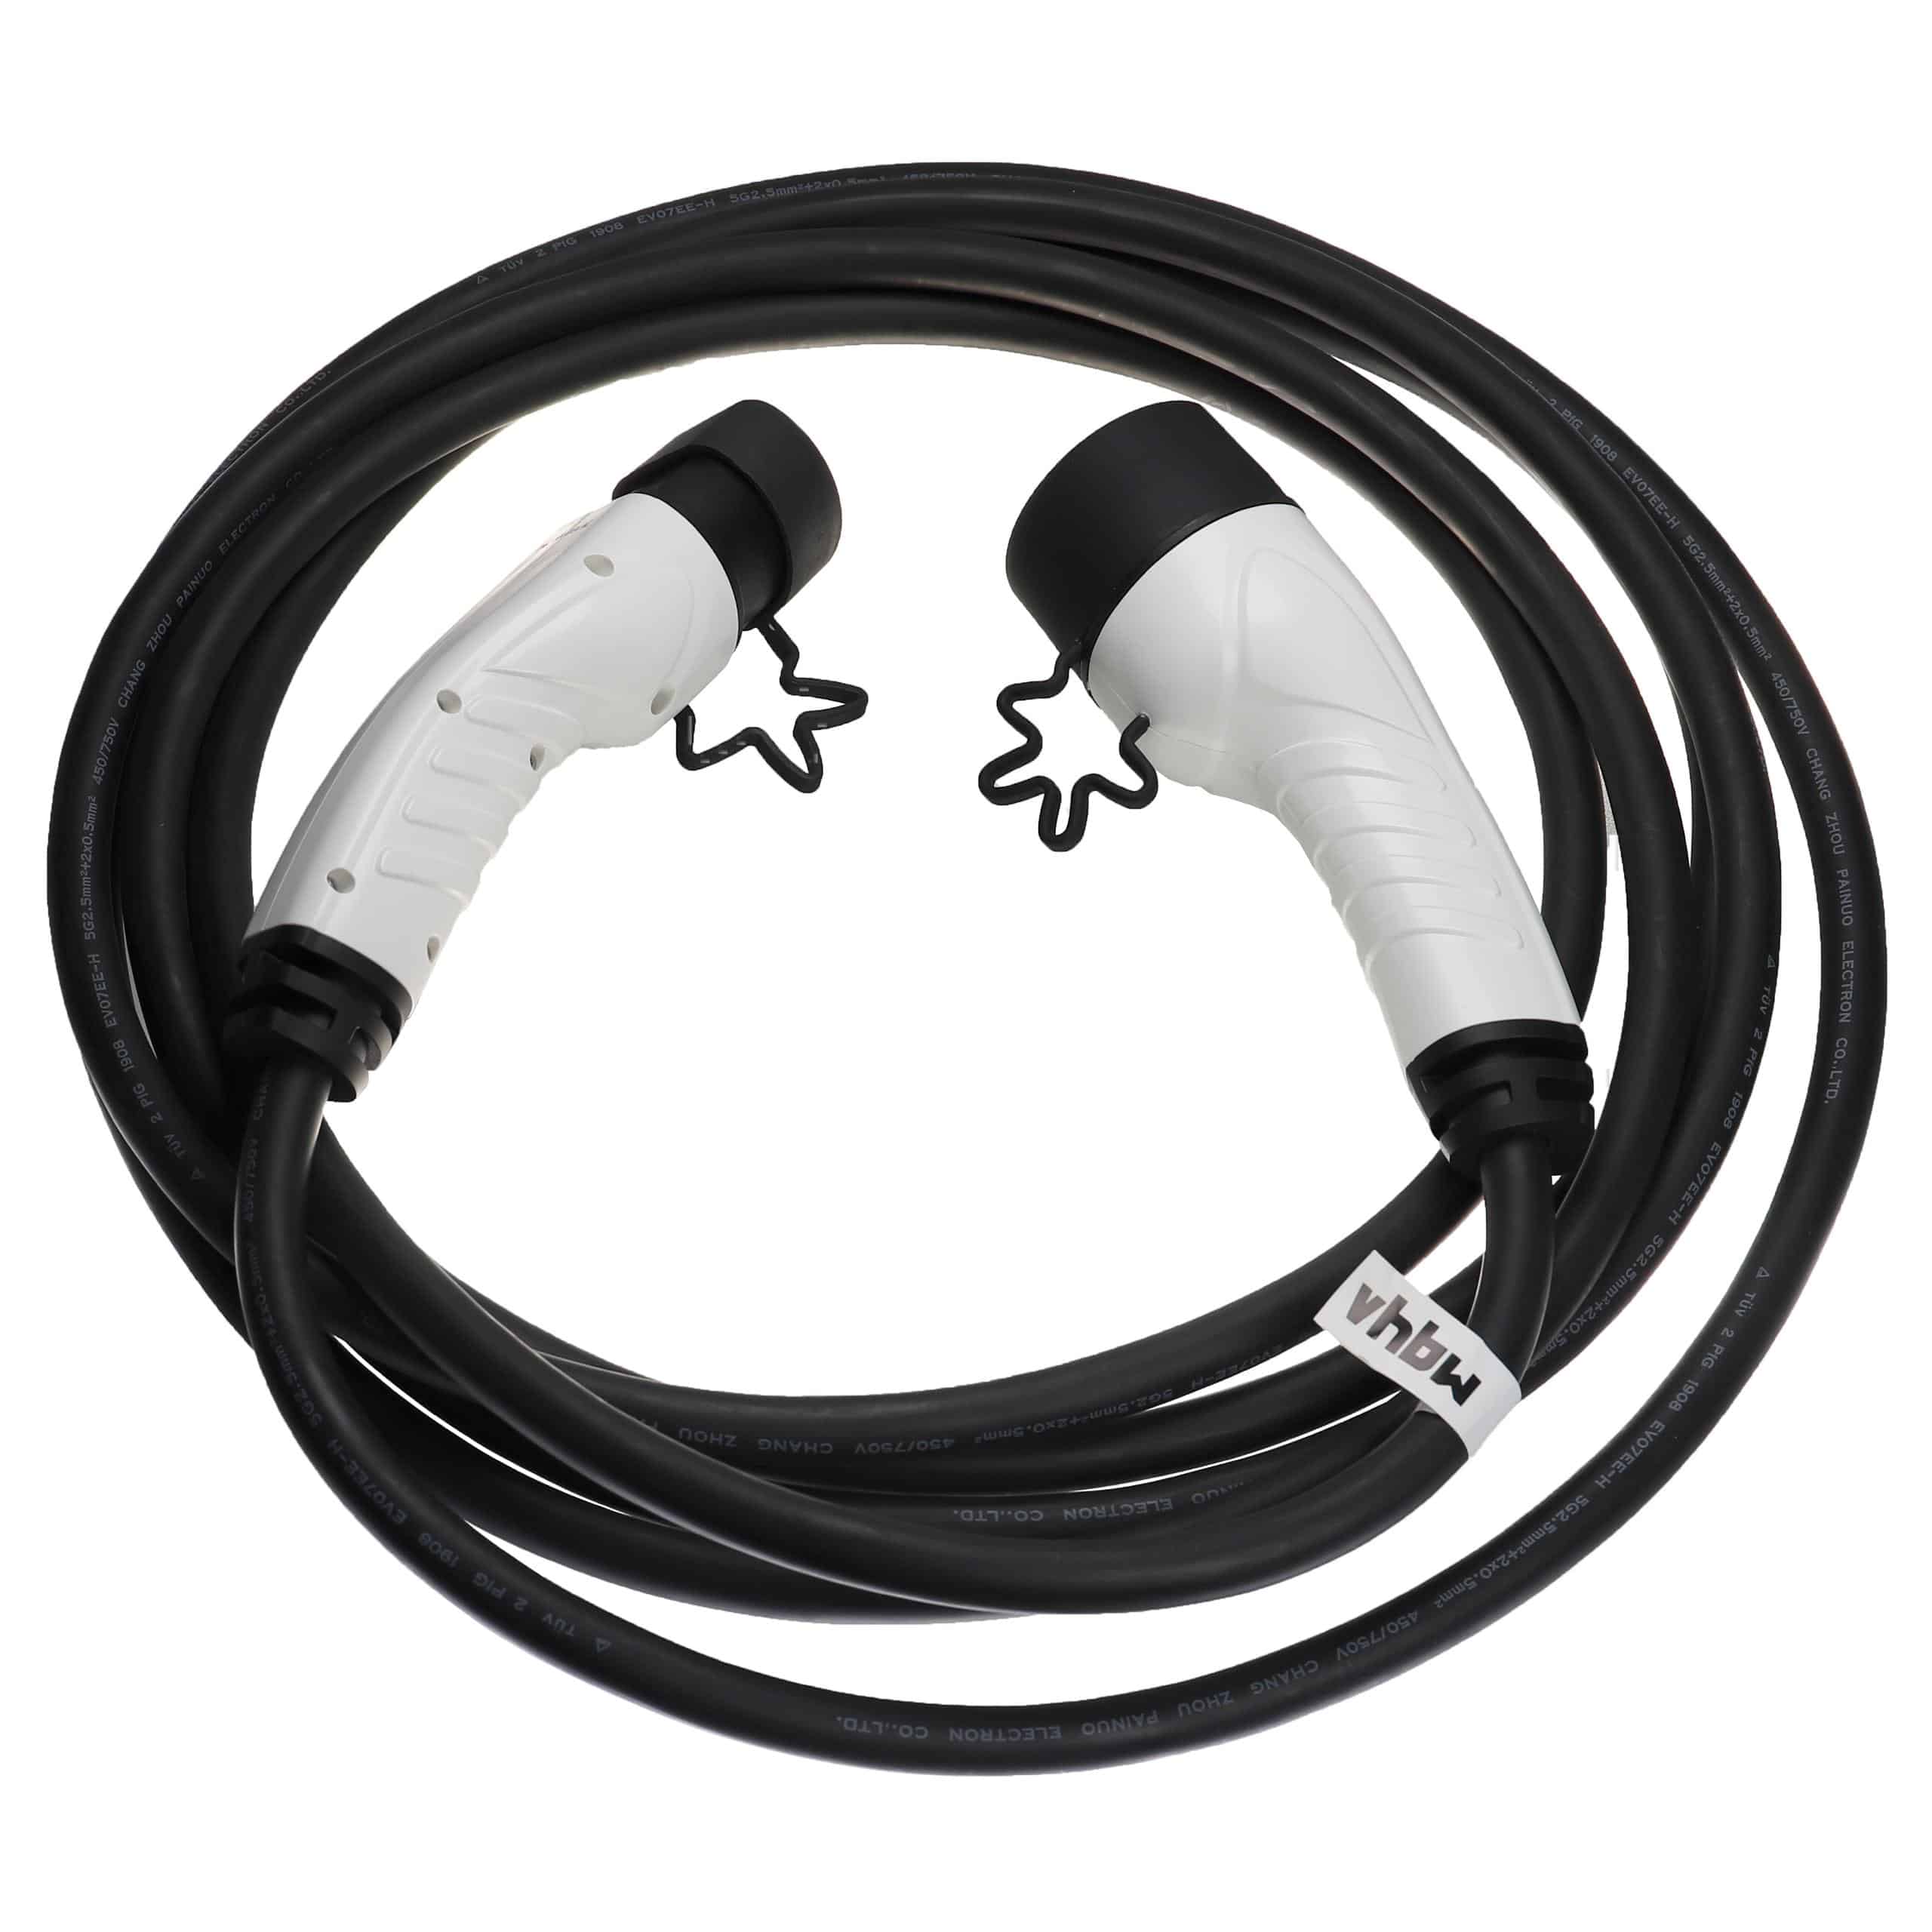 Charging Cable for Electric Car, Plug-In Hybrid - Type 2 to Type 2 Cable, 3-phase, 16 A, 11 kW, 7 m